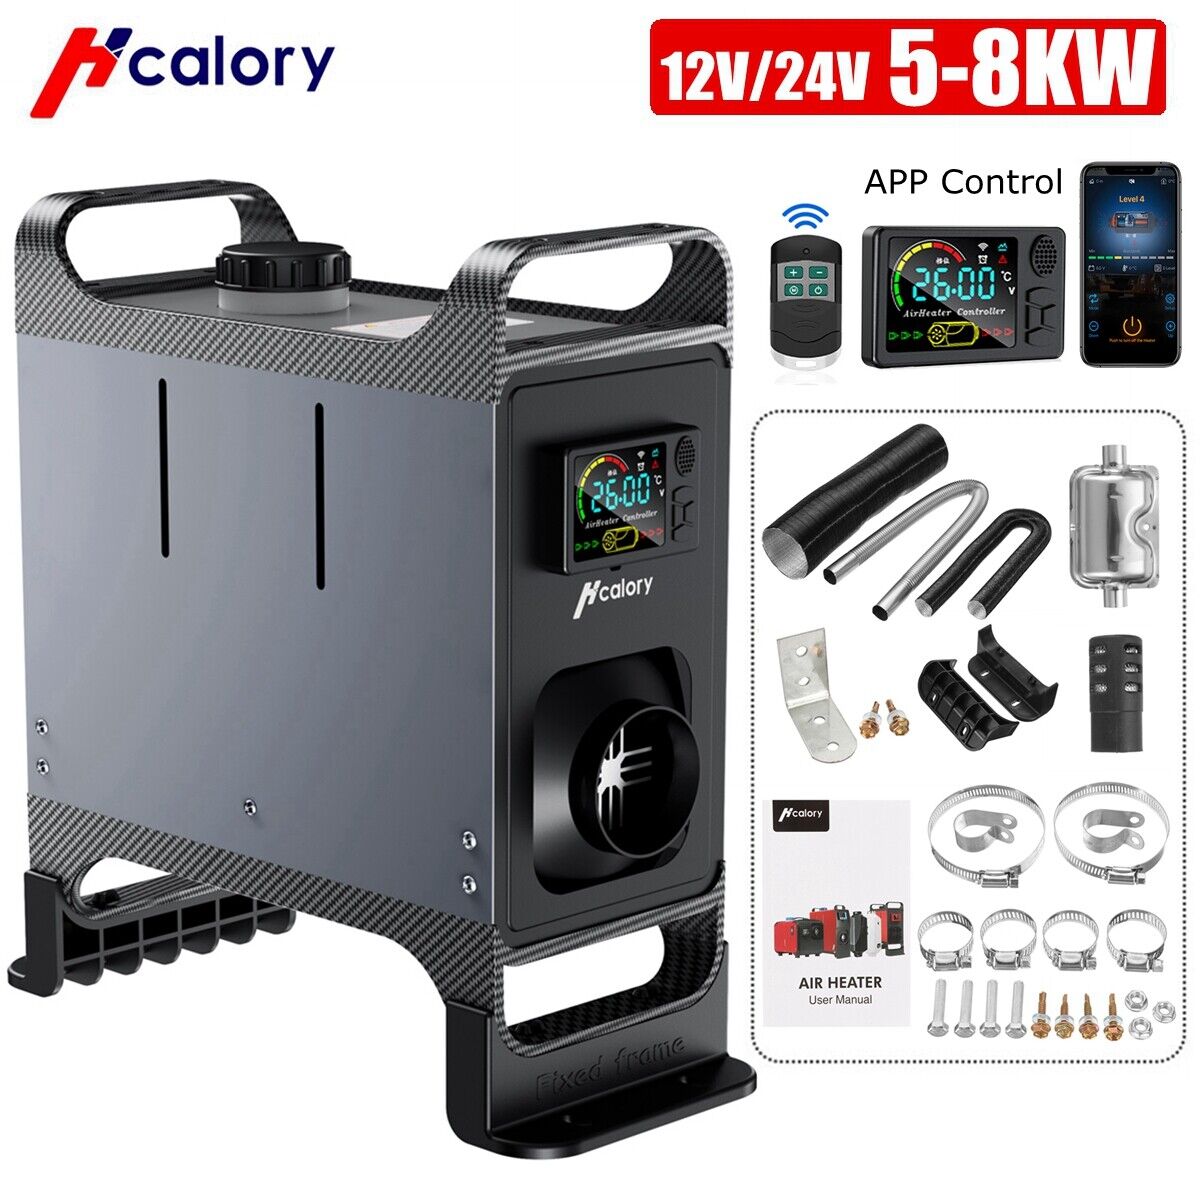 Hcalory 8KW 12V 24V Diesel Air Heater bluetooth All-in-one LCD Remote Control 